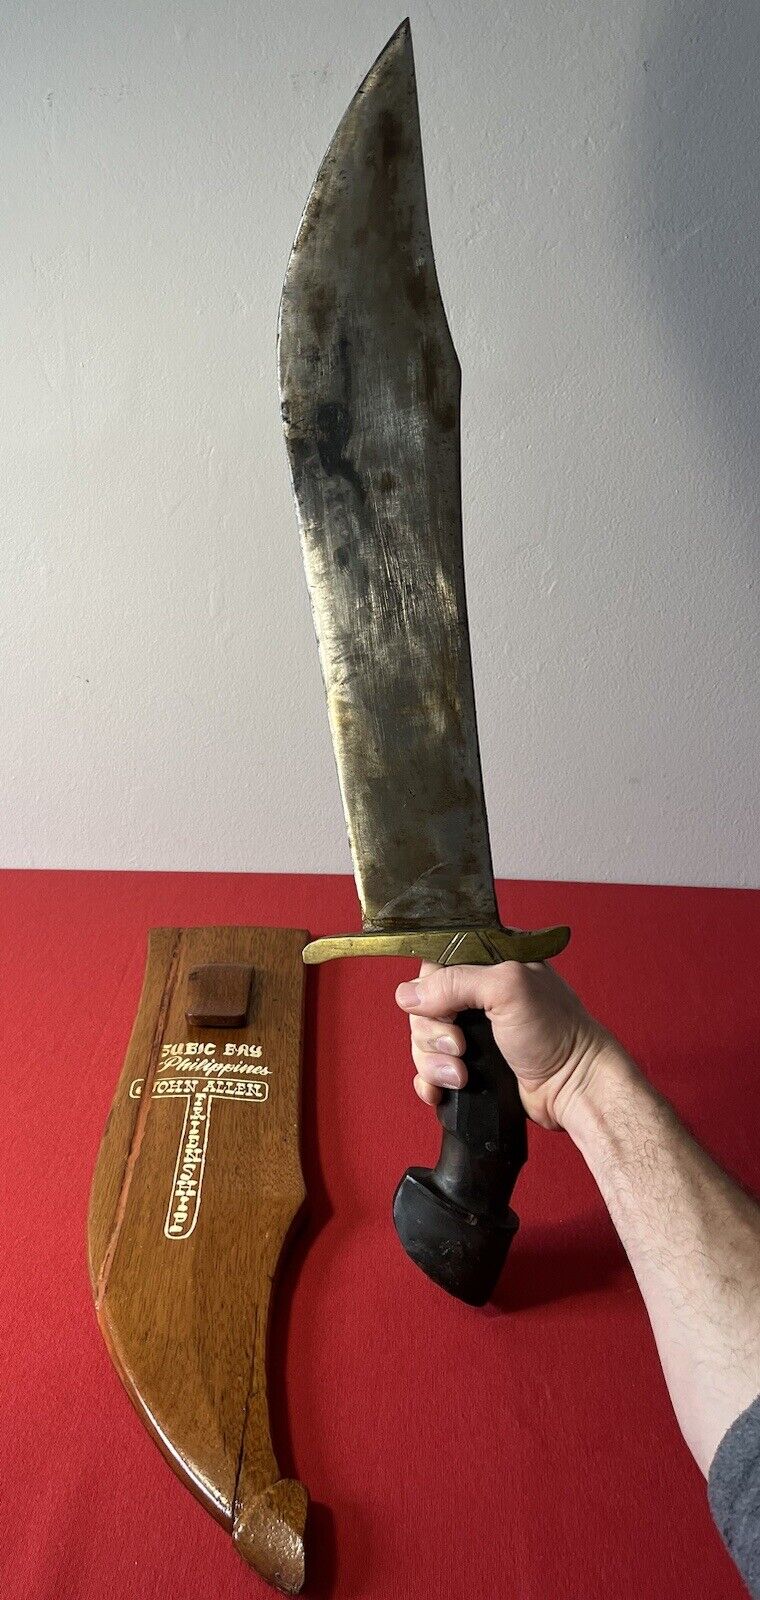 MASSIVE 2.5 FT / WW2 Philippines Dagger or Short Sword / Bringback Theater Made